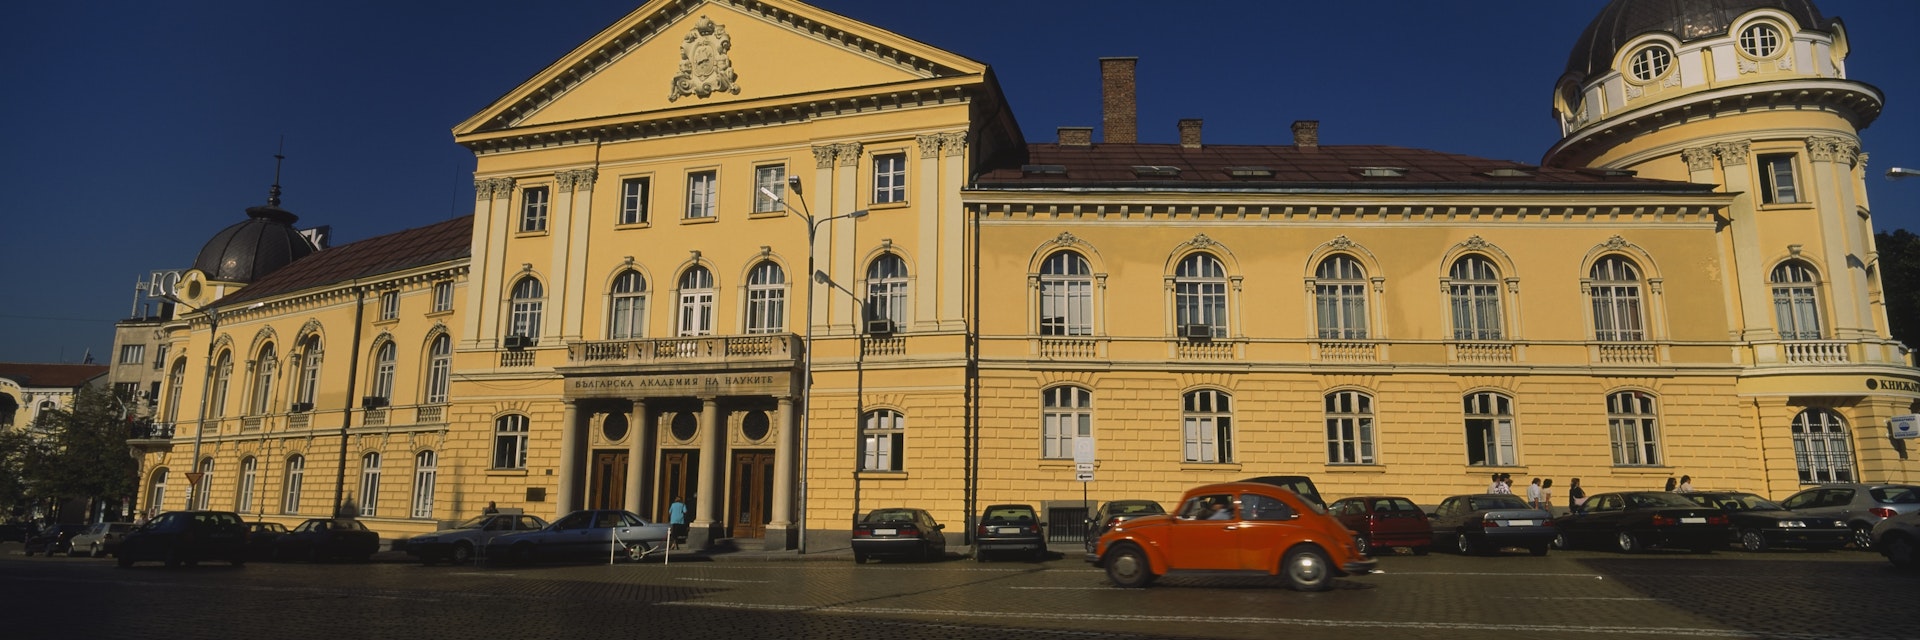 Cars parked in front of an art museum, National Art Gallery, Sofia, Bulgaria